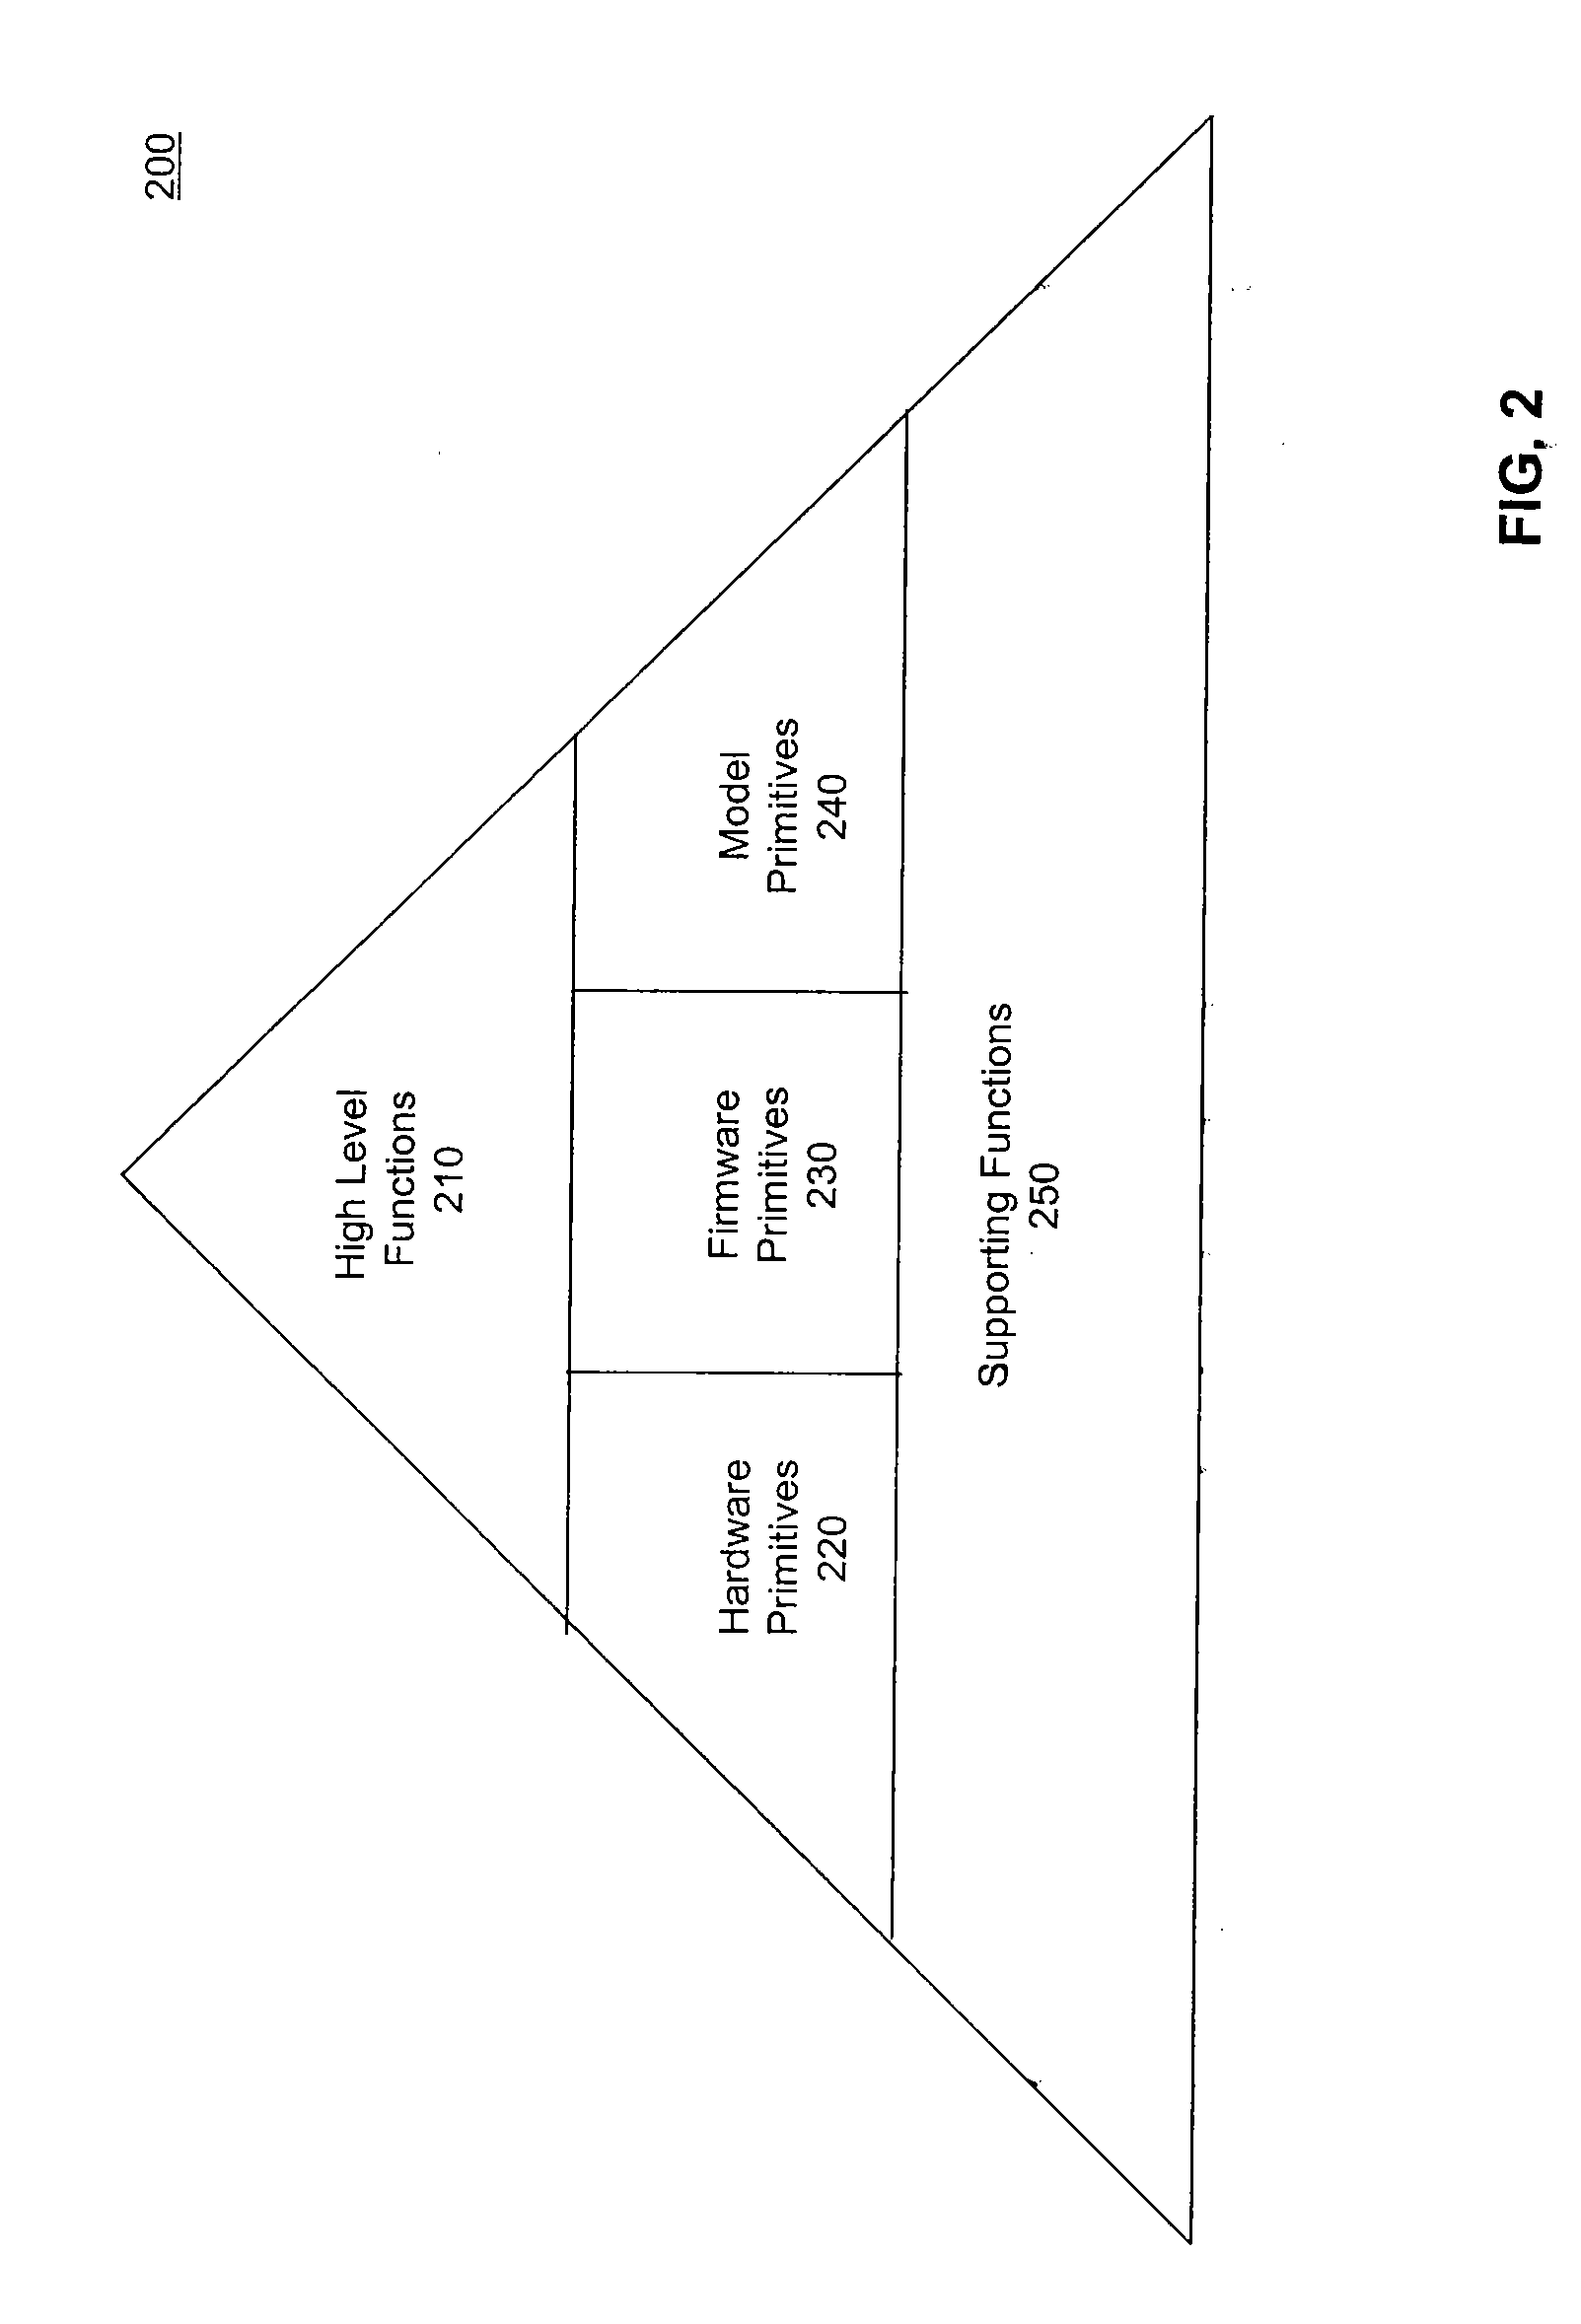 System and Methods for Side-Channel Attack Prevention